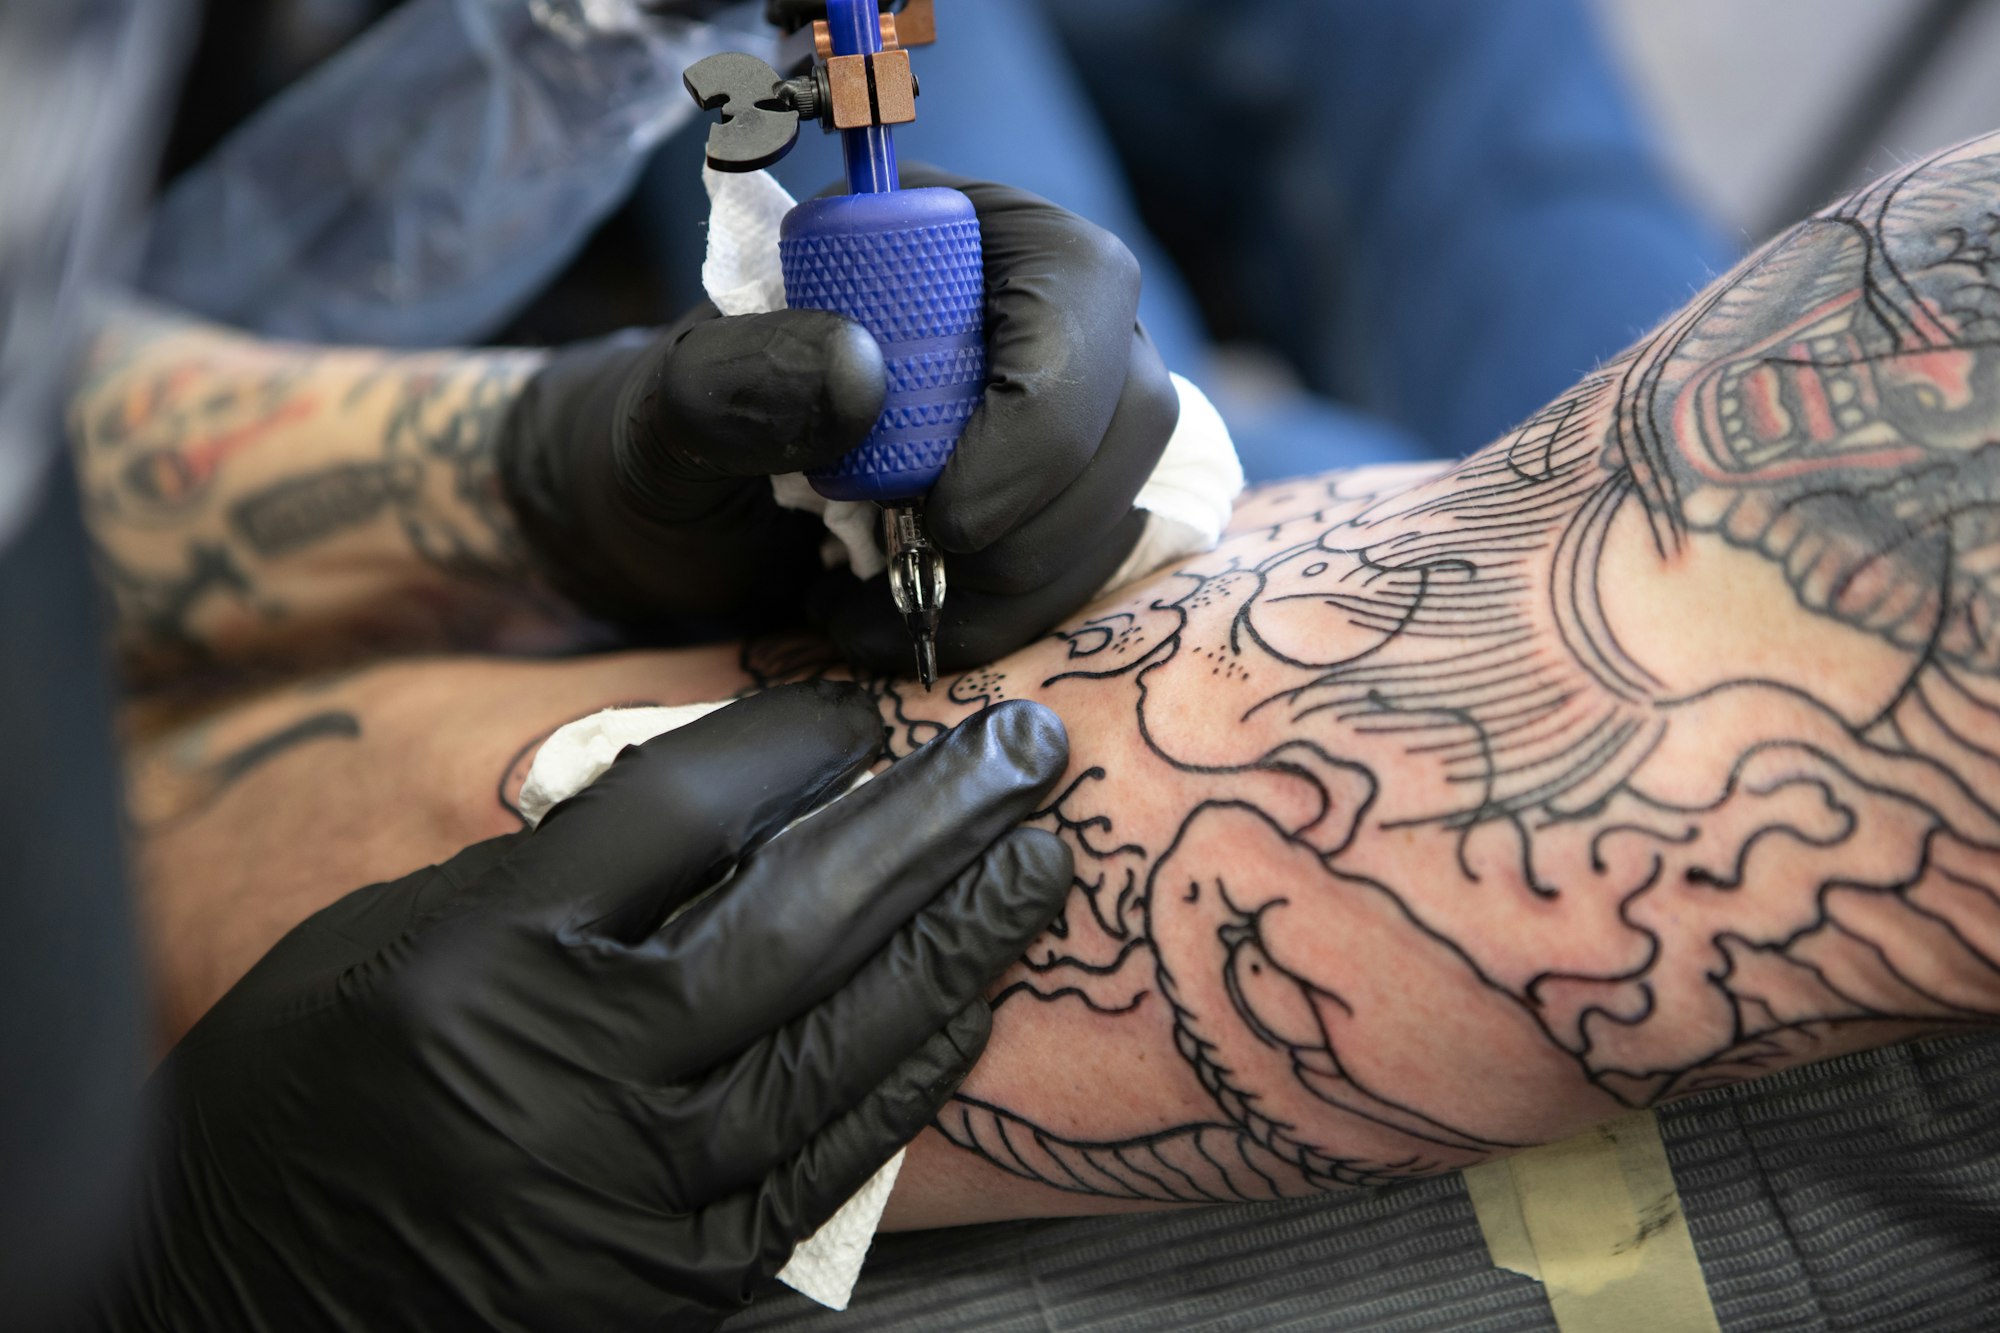 Is Tattooing Halal? Exploring the Halal Perspective